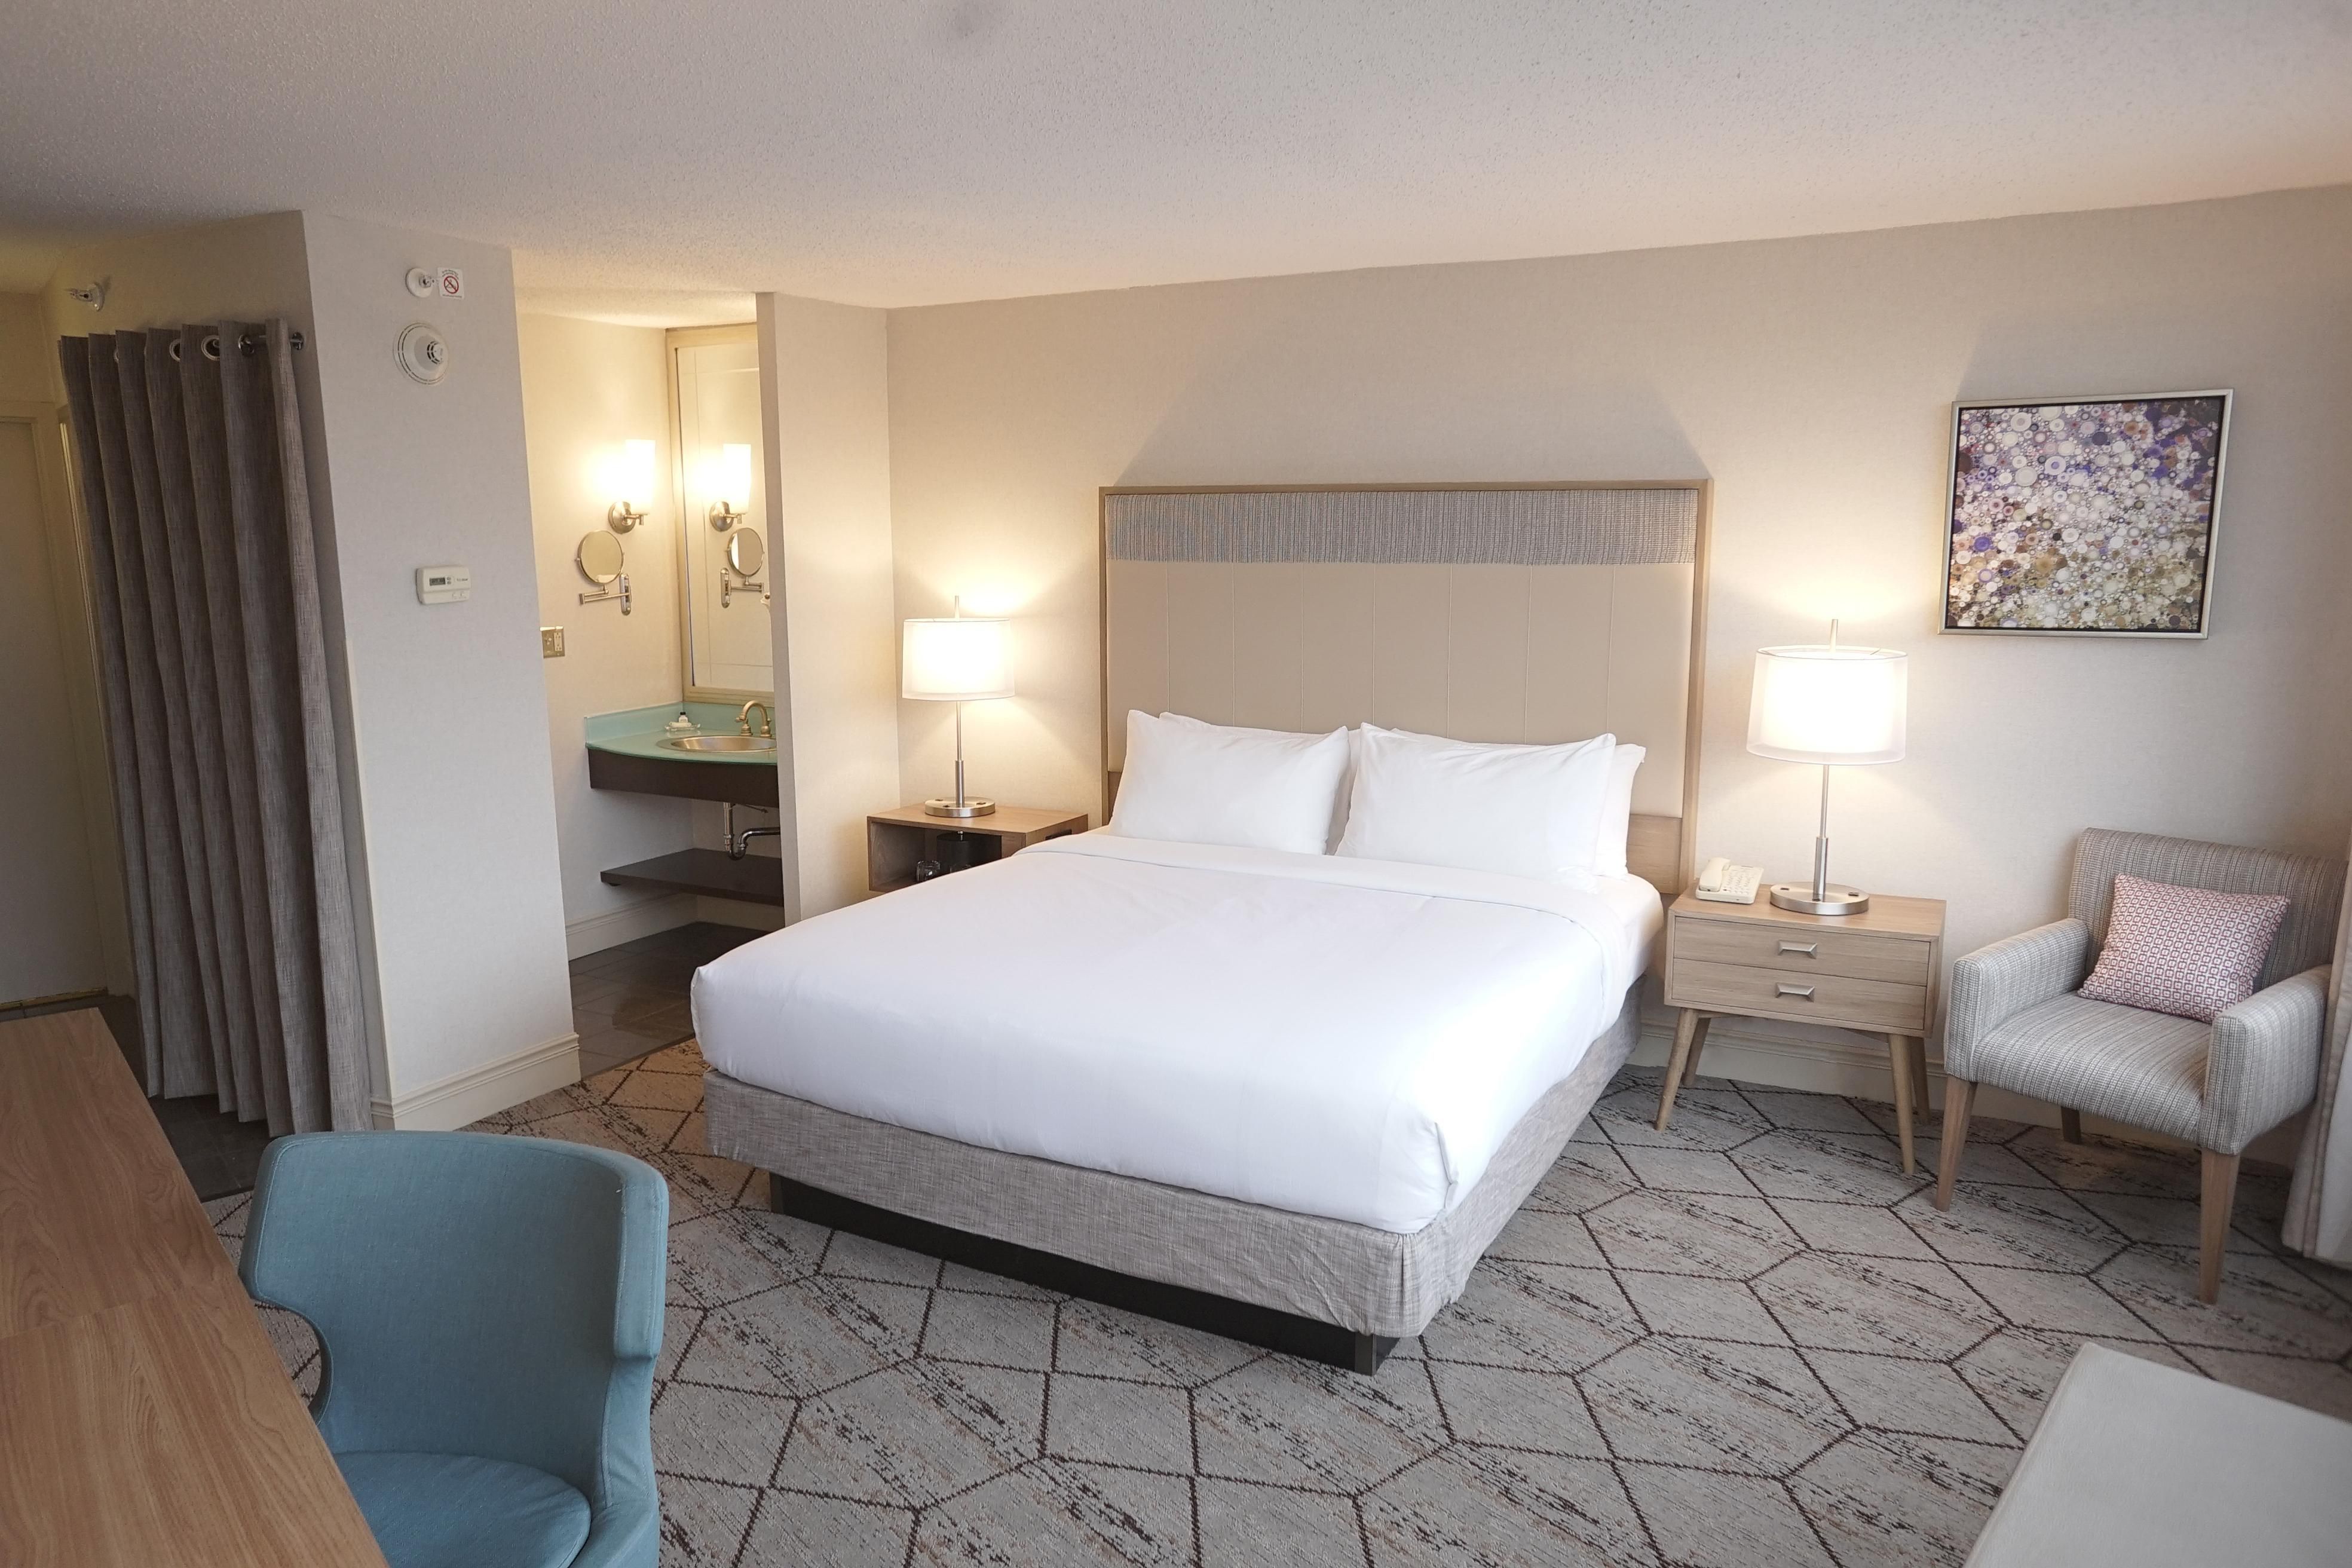 Our beautiful newly renovated room with a King bed.